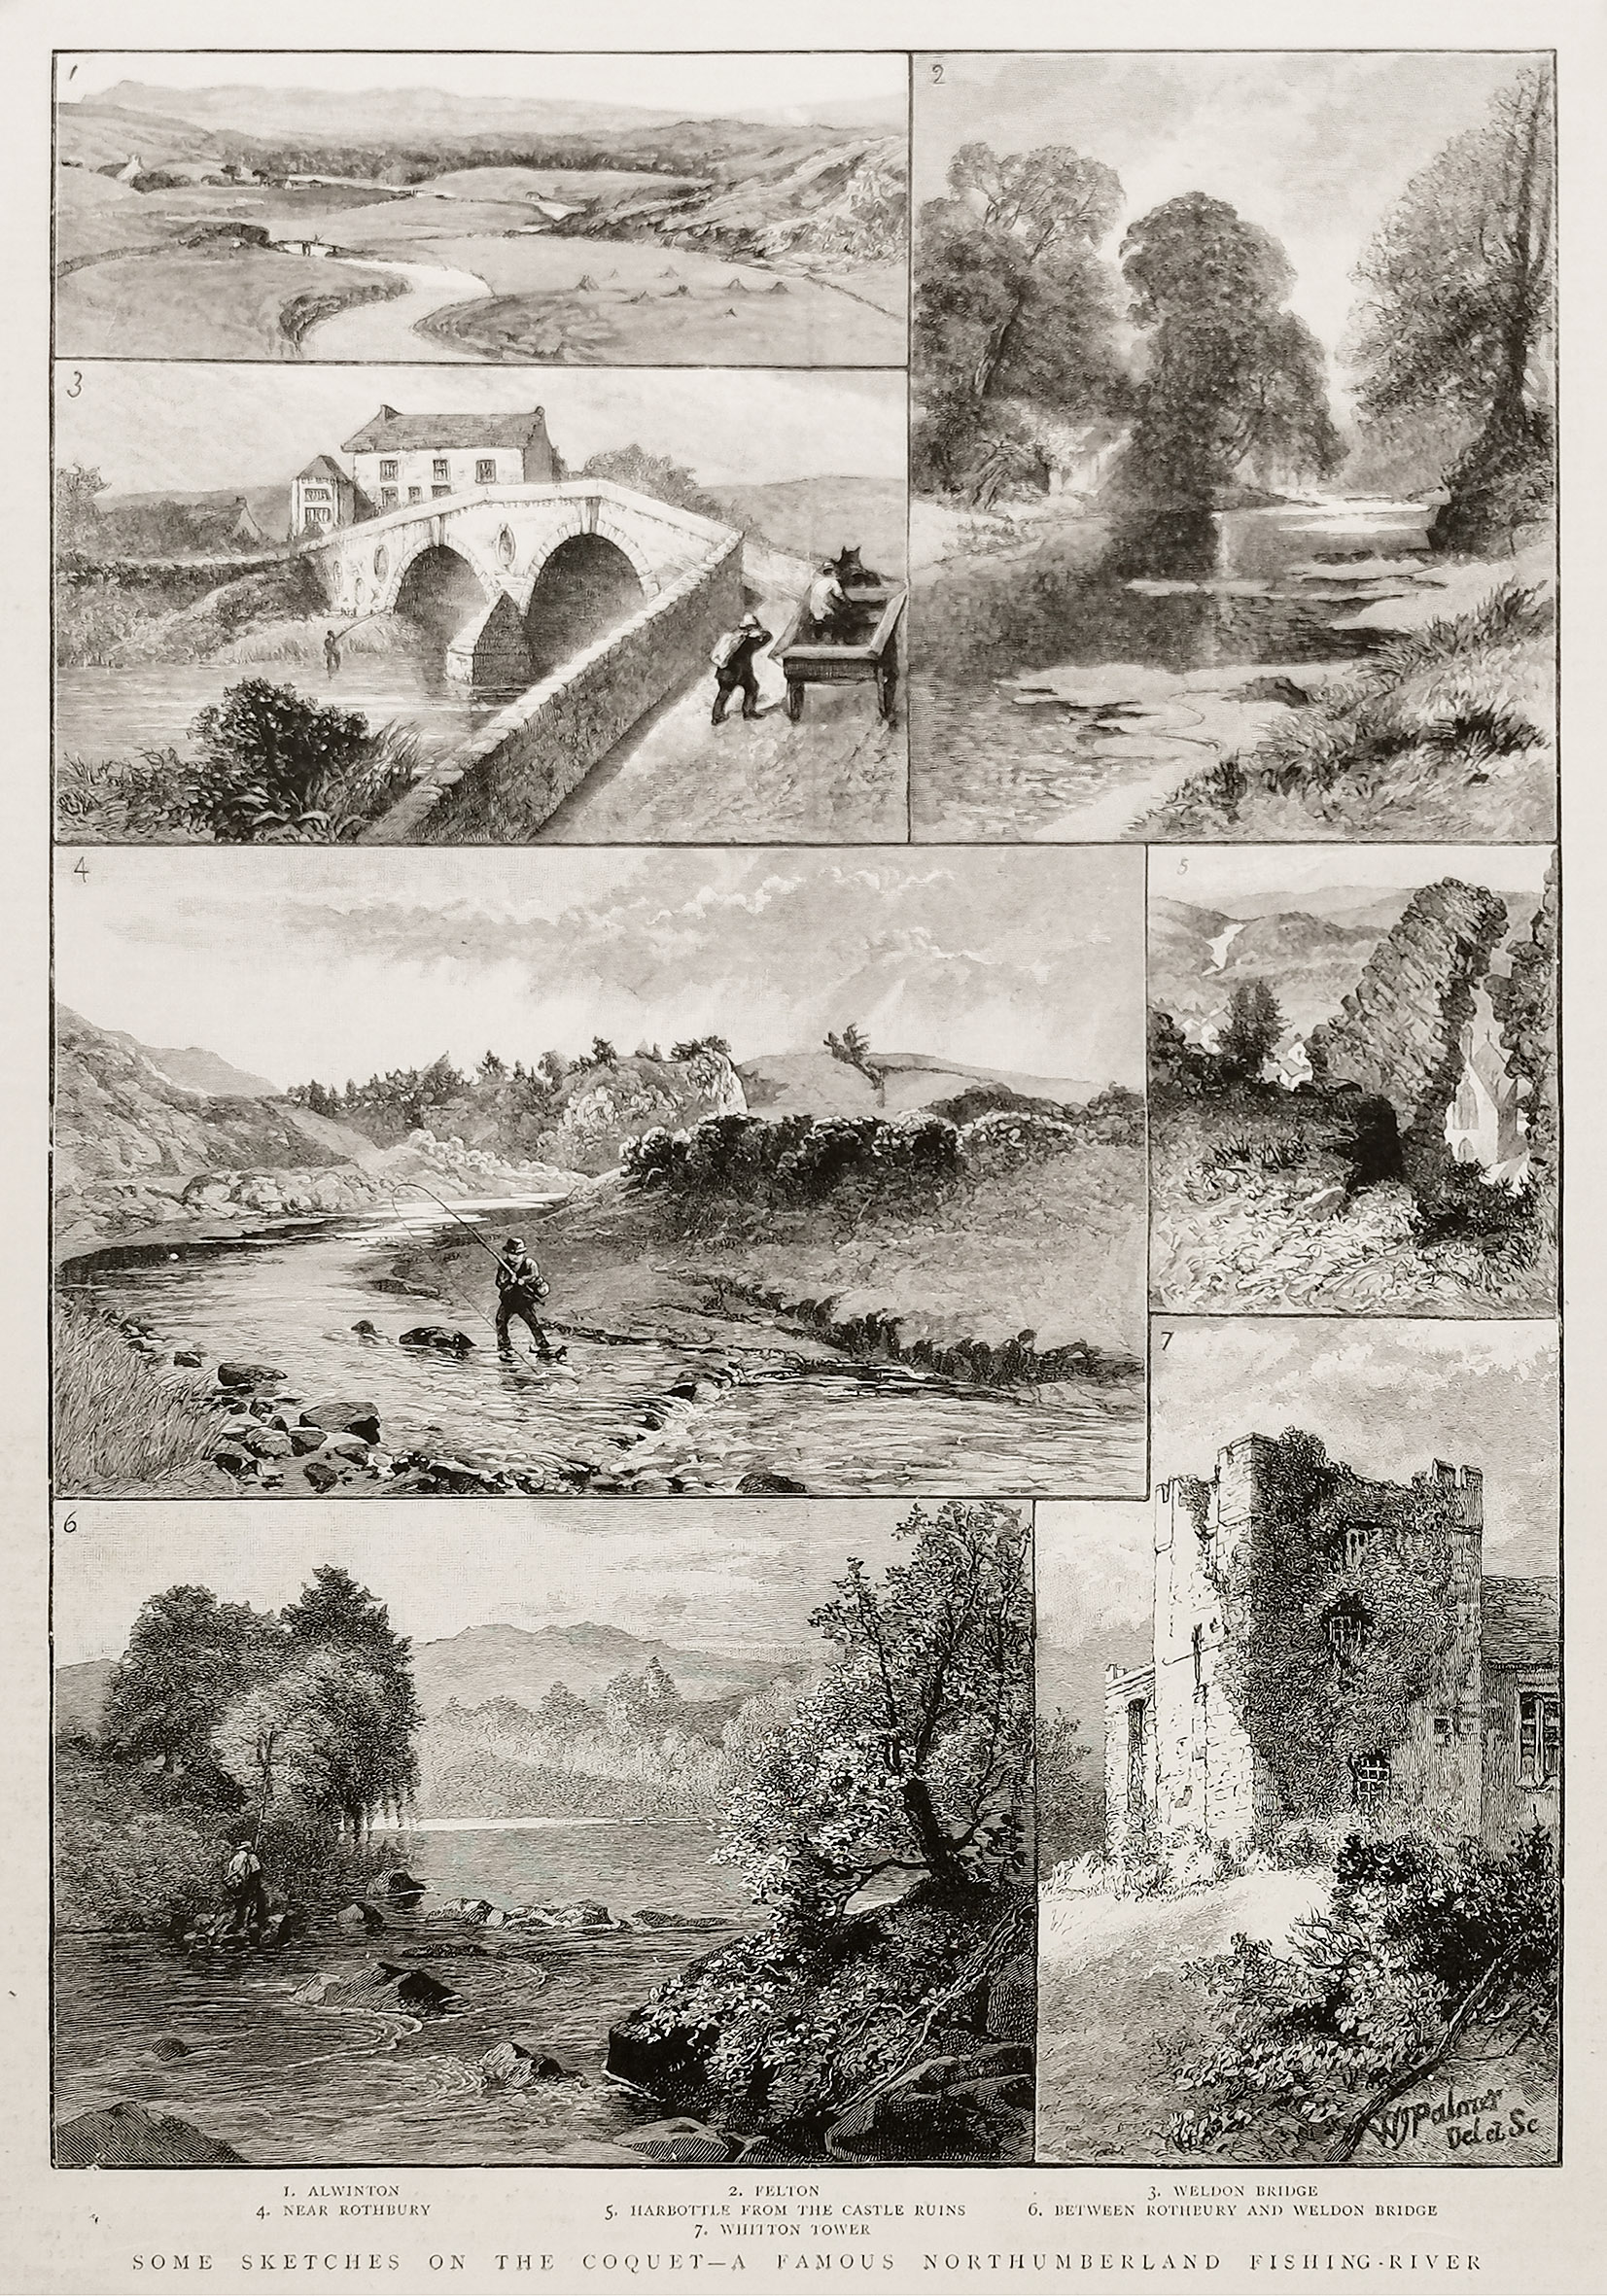 Some Sketches on the Coquet, a Famous Northumberland Fishing-River. - Antique Print from 1892